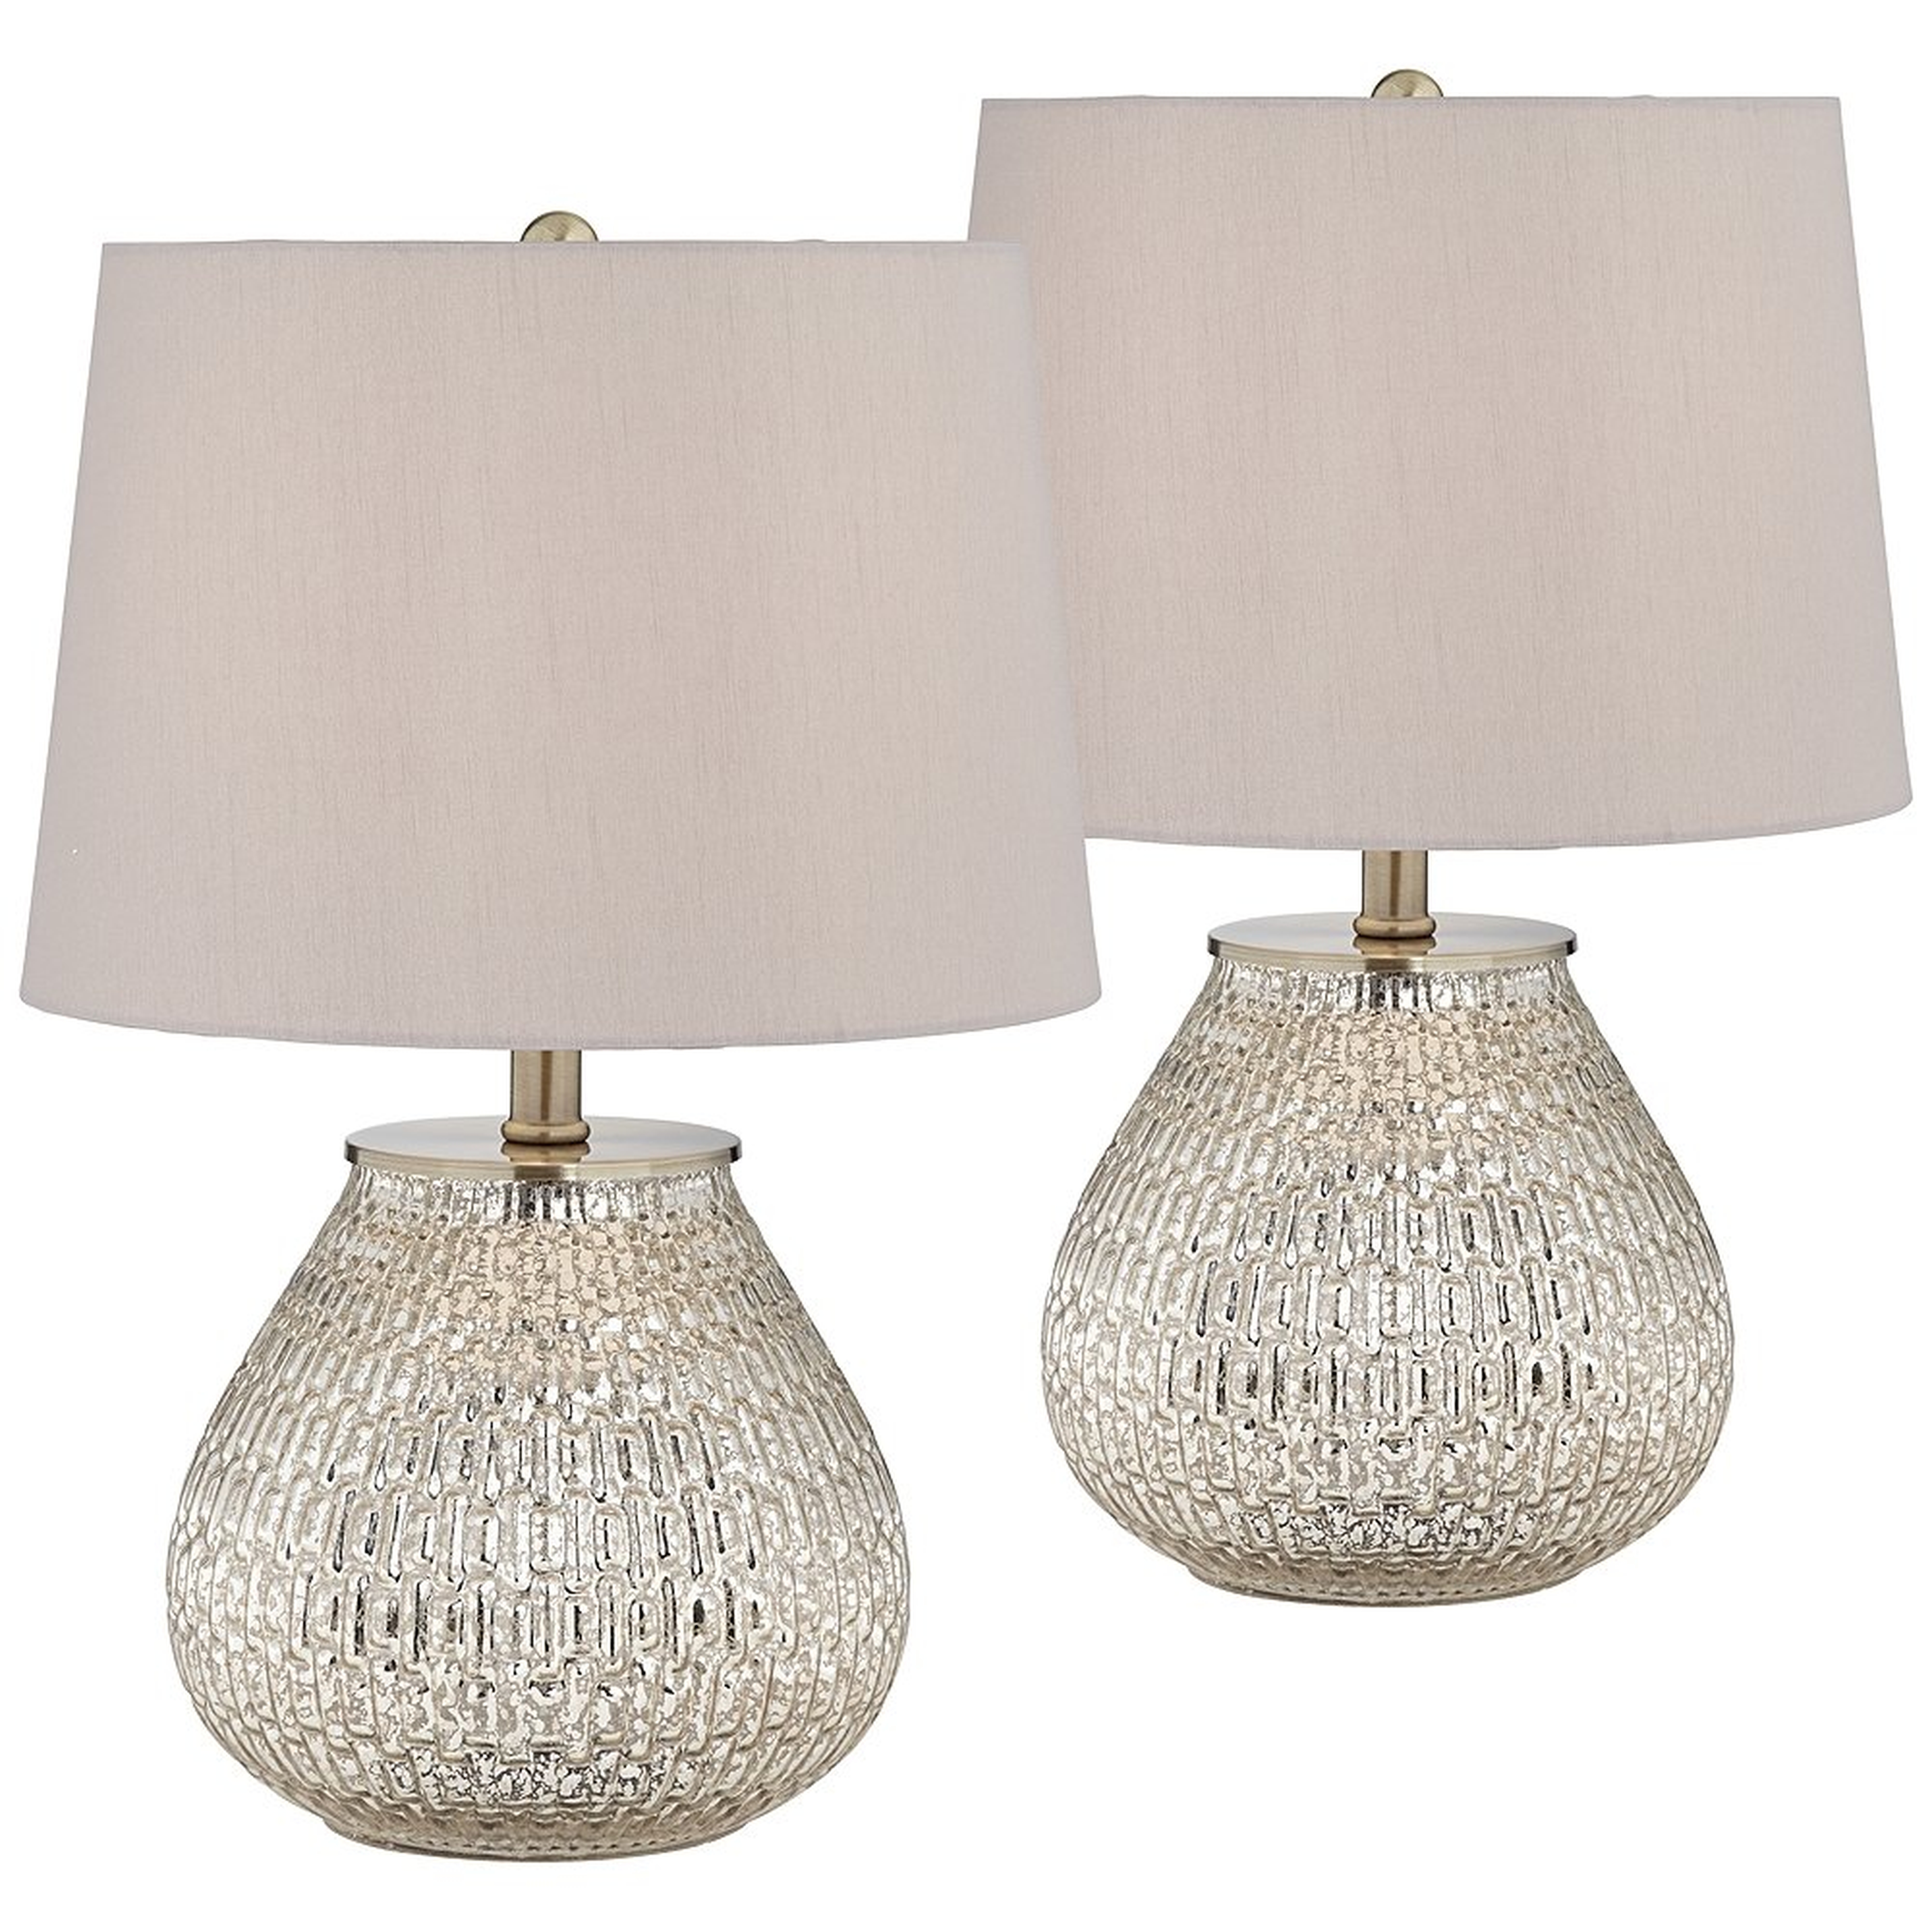 Zax 19 1/2" High Mercury Glass Accent Table Lamp Set of 2 - Style # 57R61 - Lamps Plus